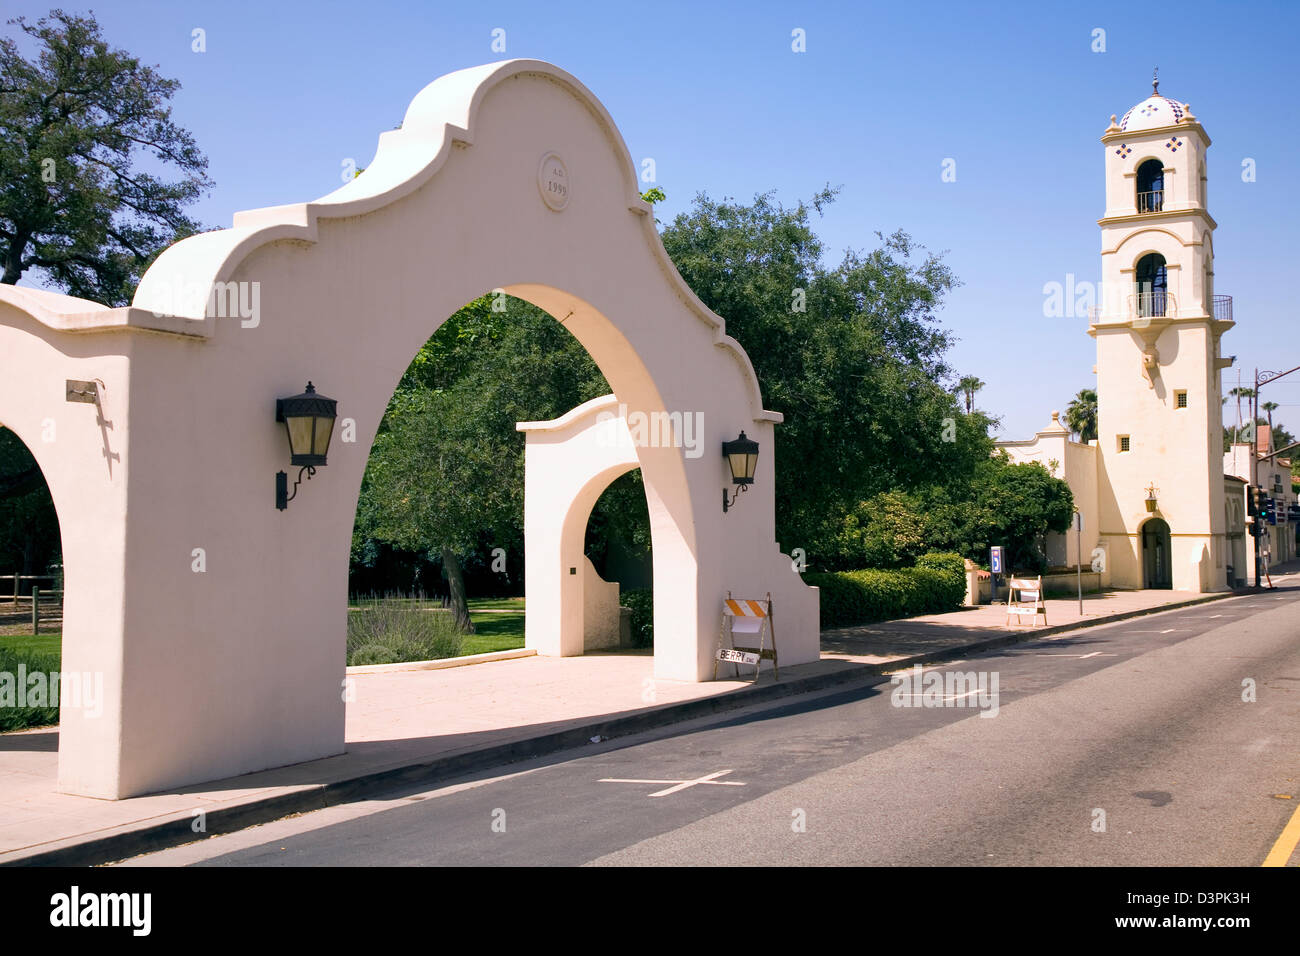 The landmark Spanish-style Post Office in the charming little central California town of Ojai, USA Stock Photo